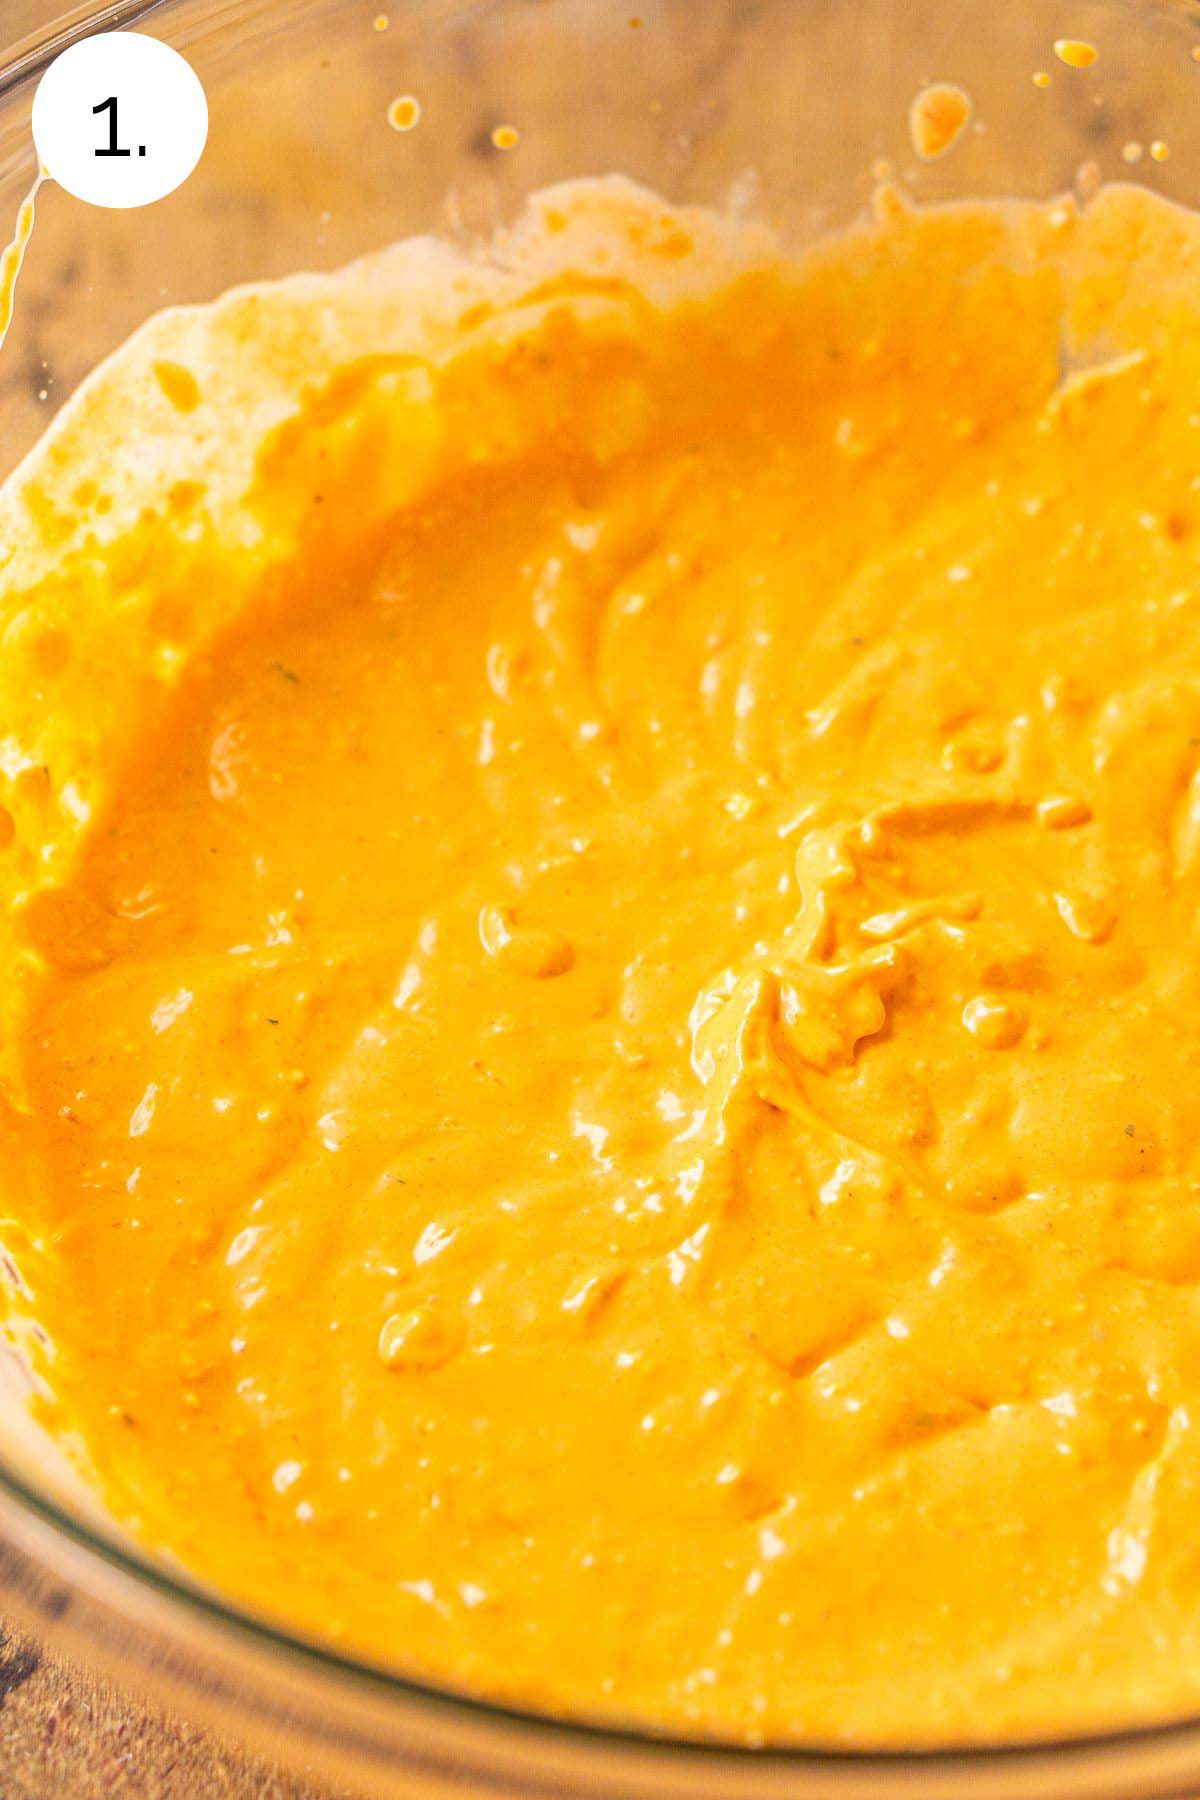 The cream cheese and hot sauce mixture in a large mixing bowl after the ingredients have been mixed together.